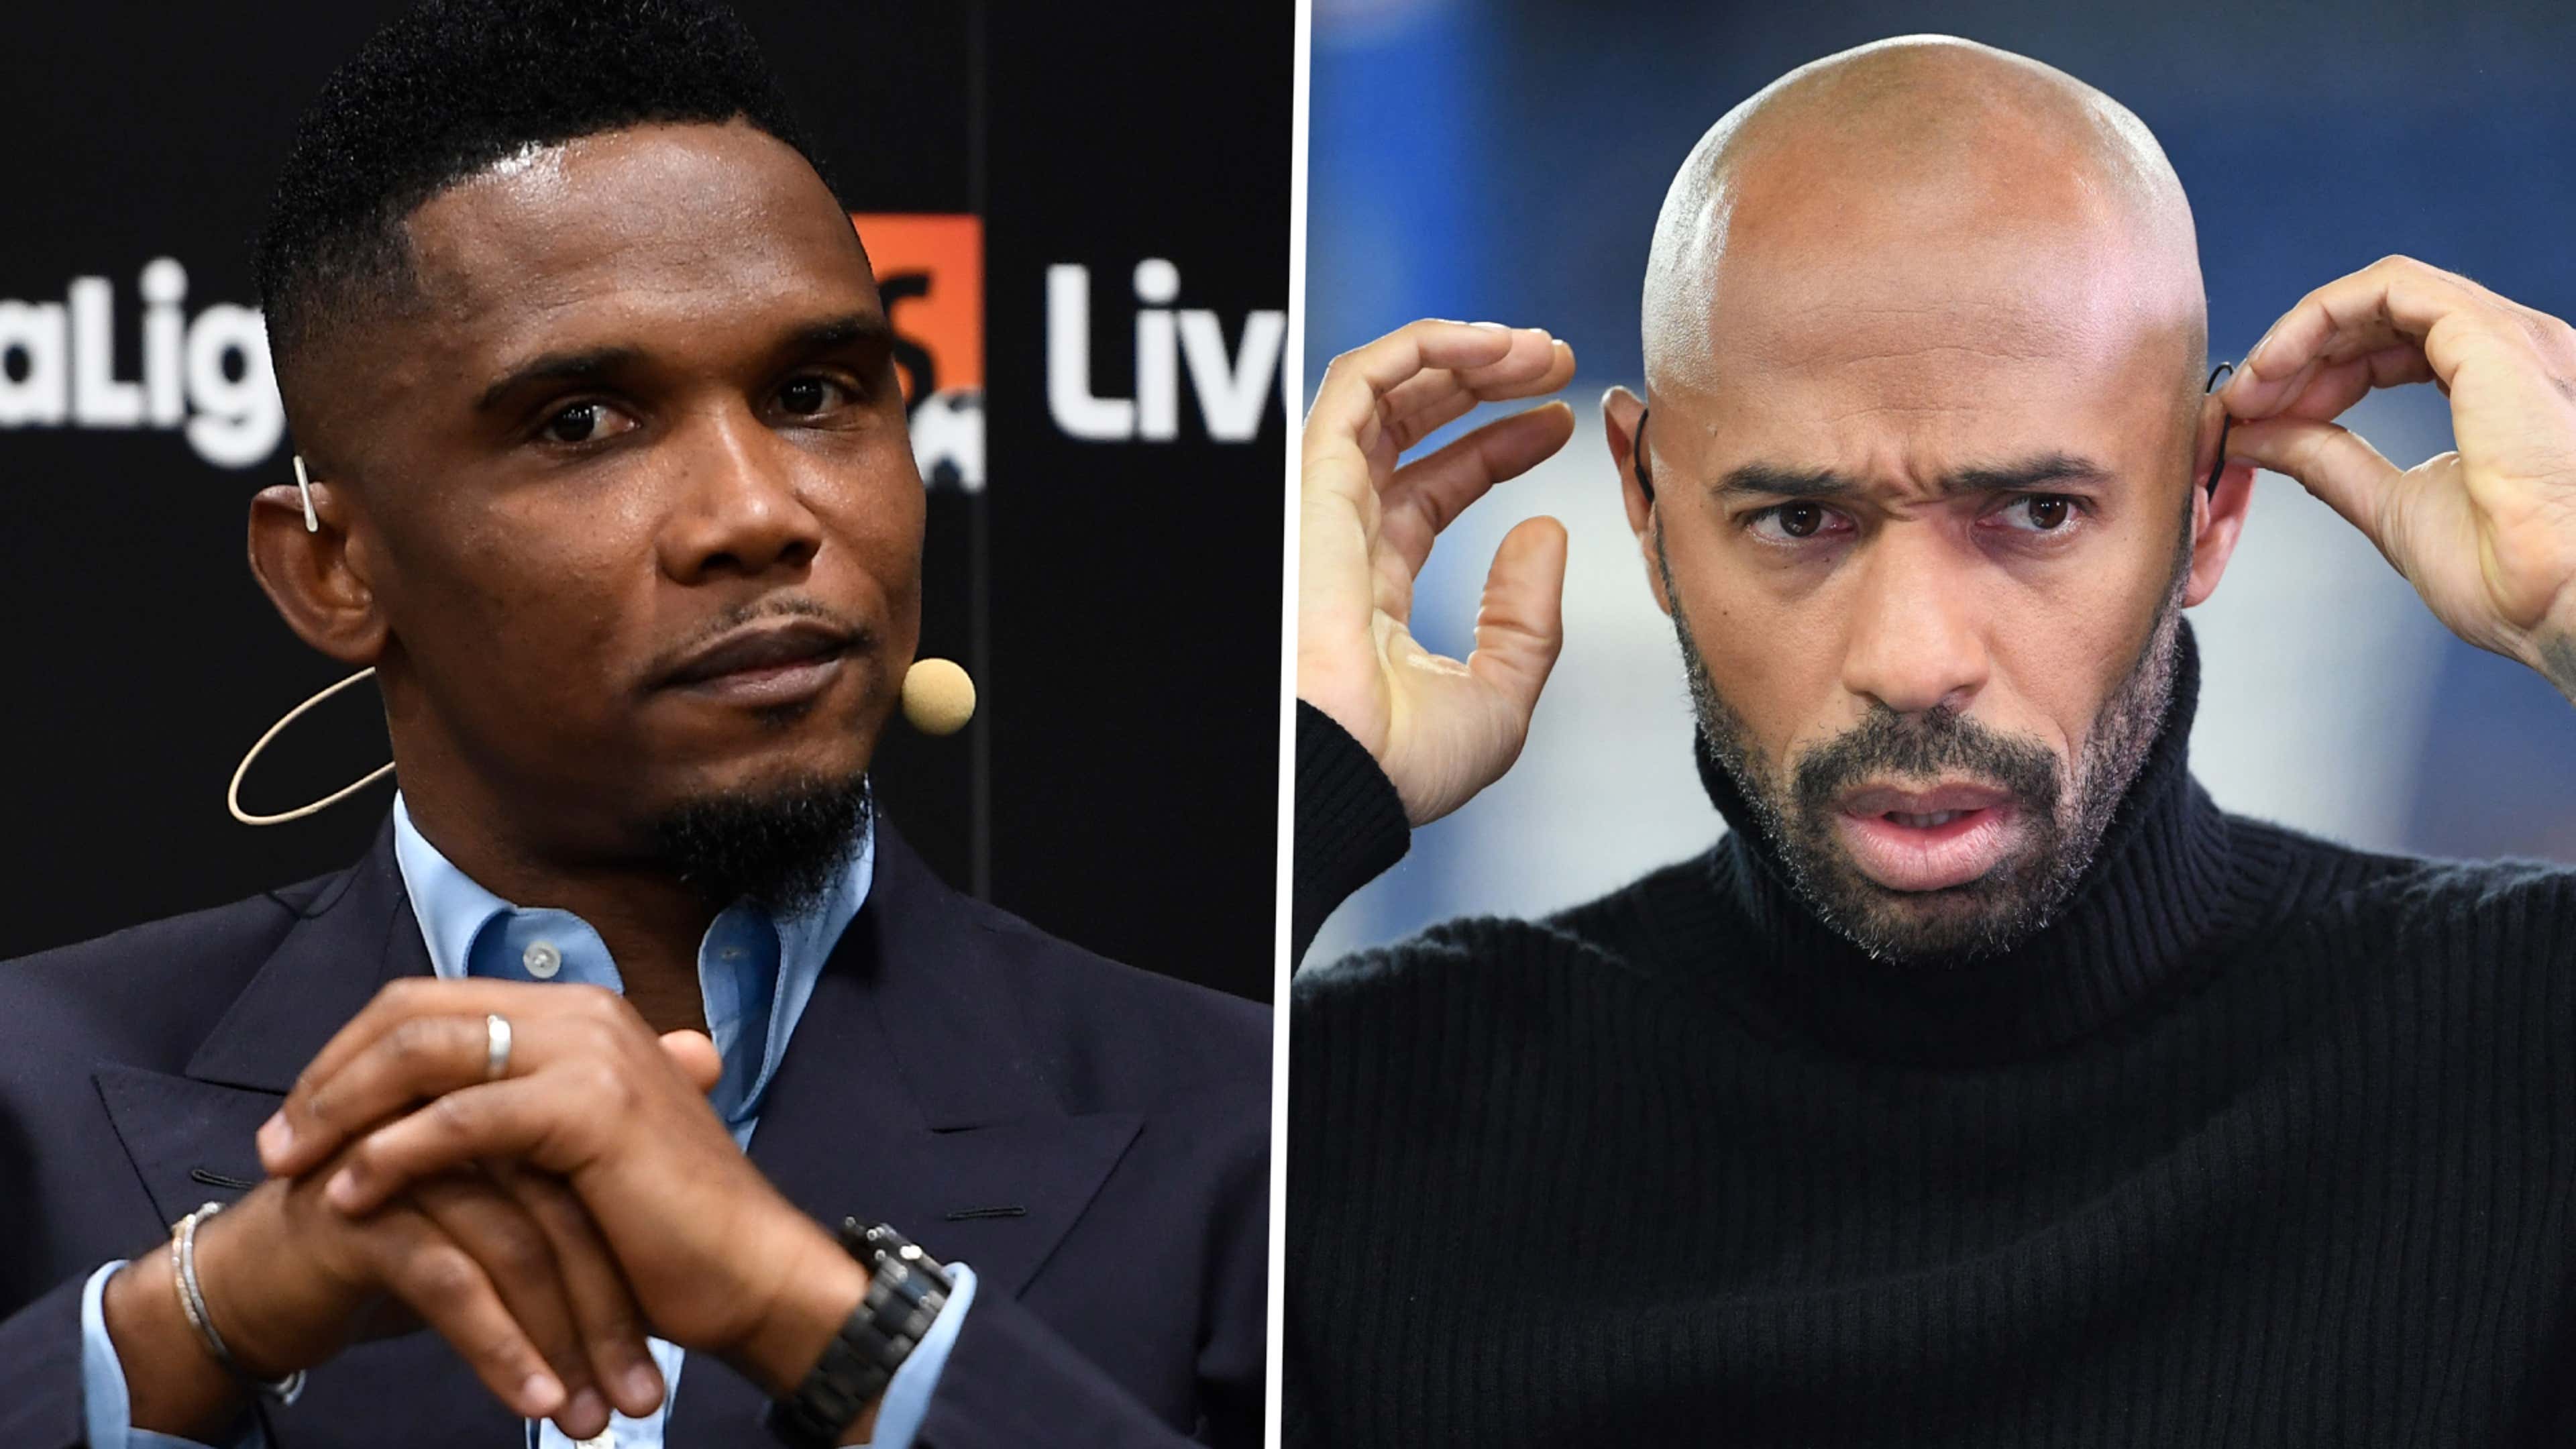 Eto'o sensationally claims Anelka was better than Thierry Henry